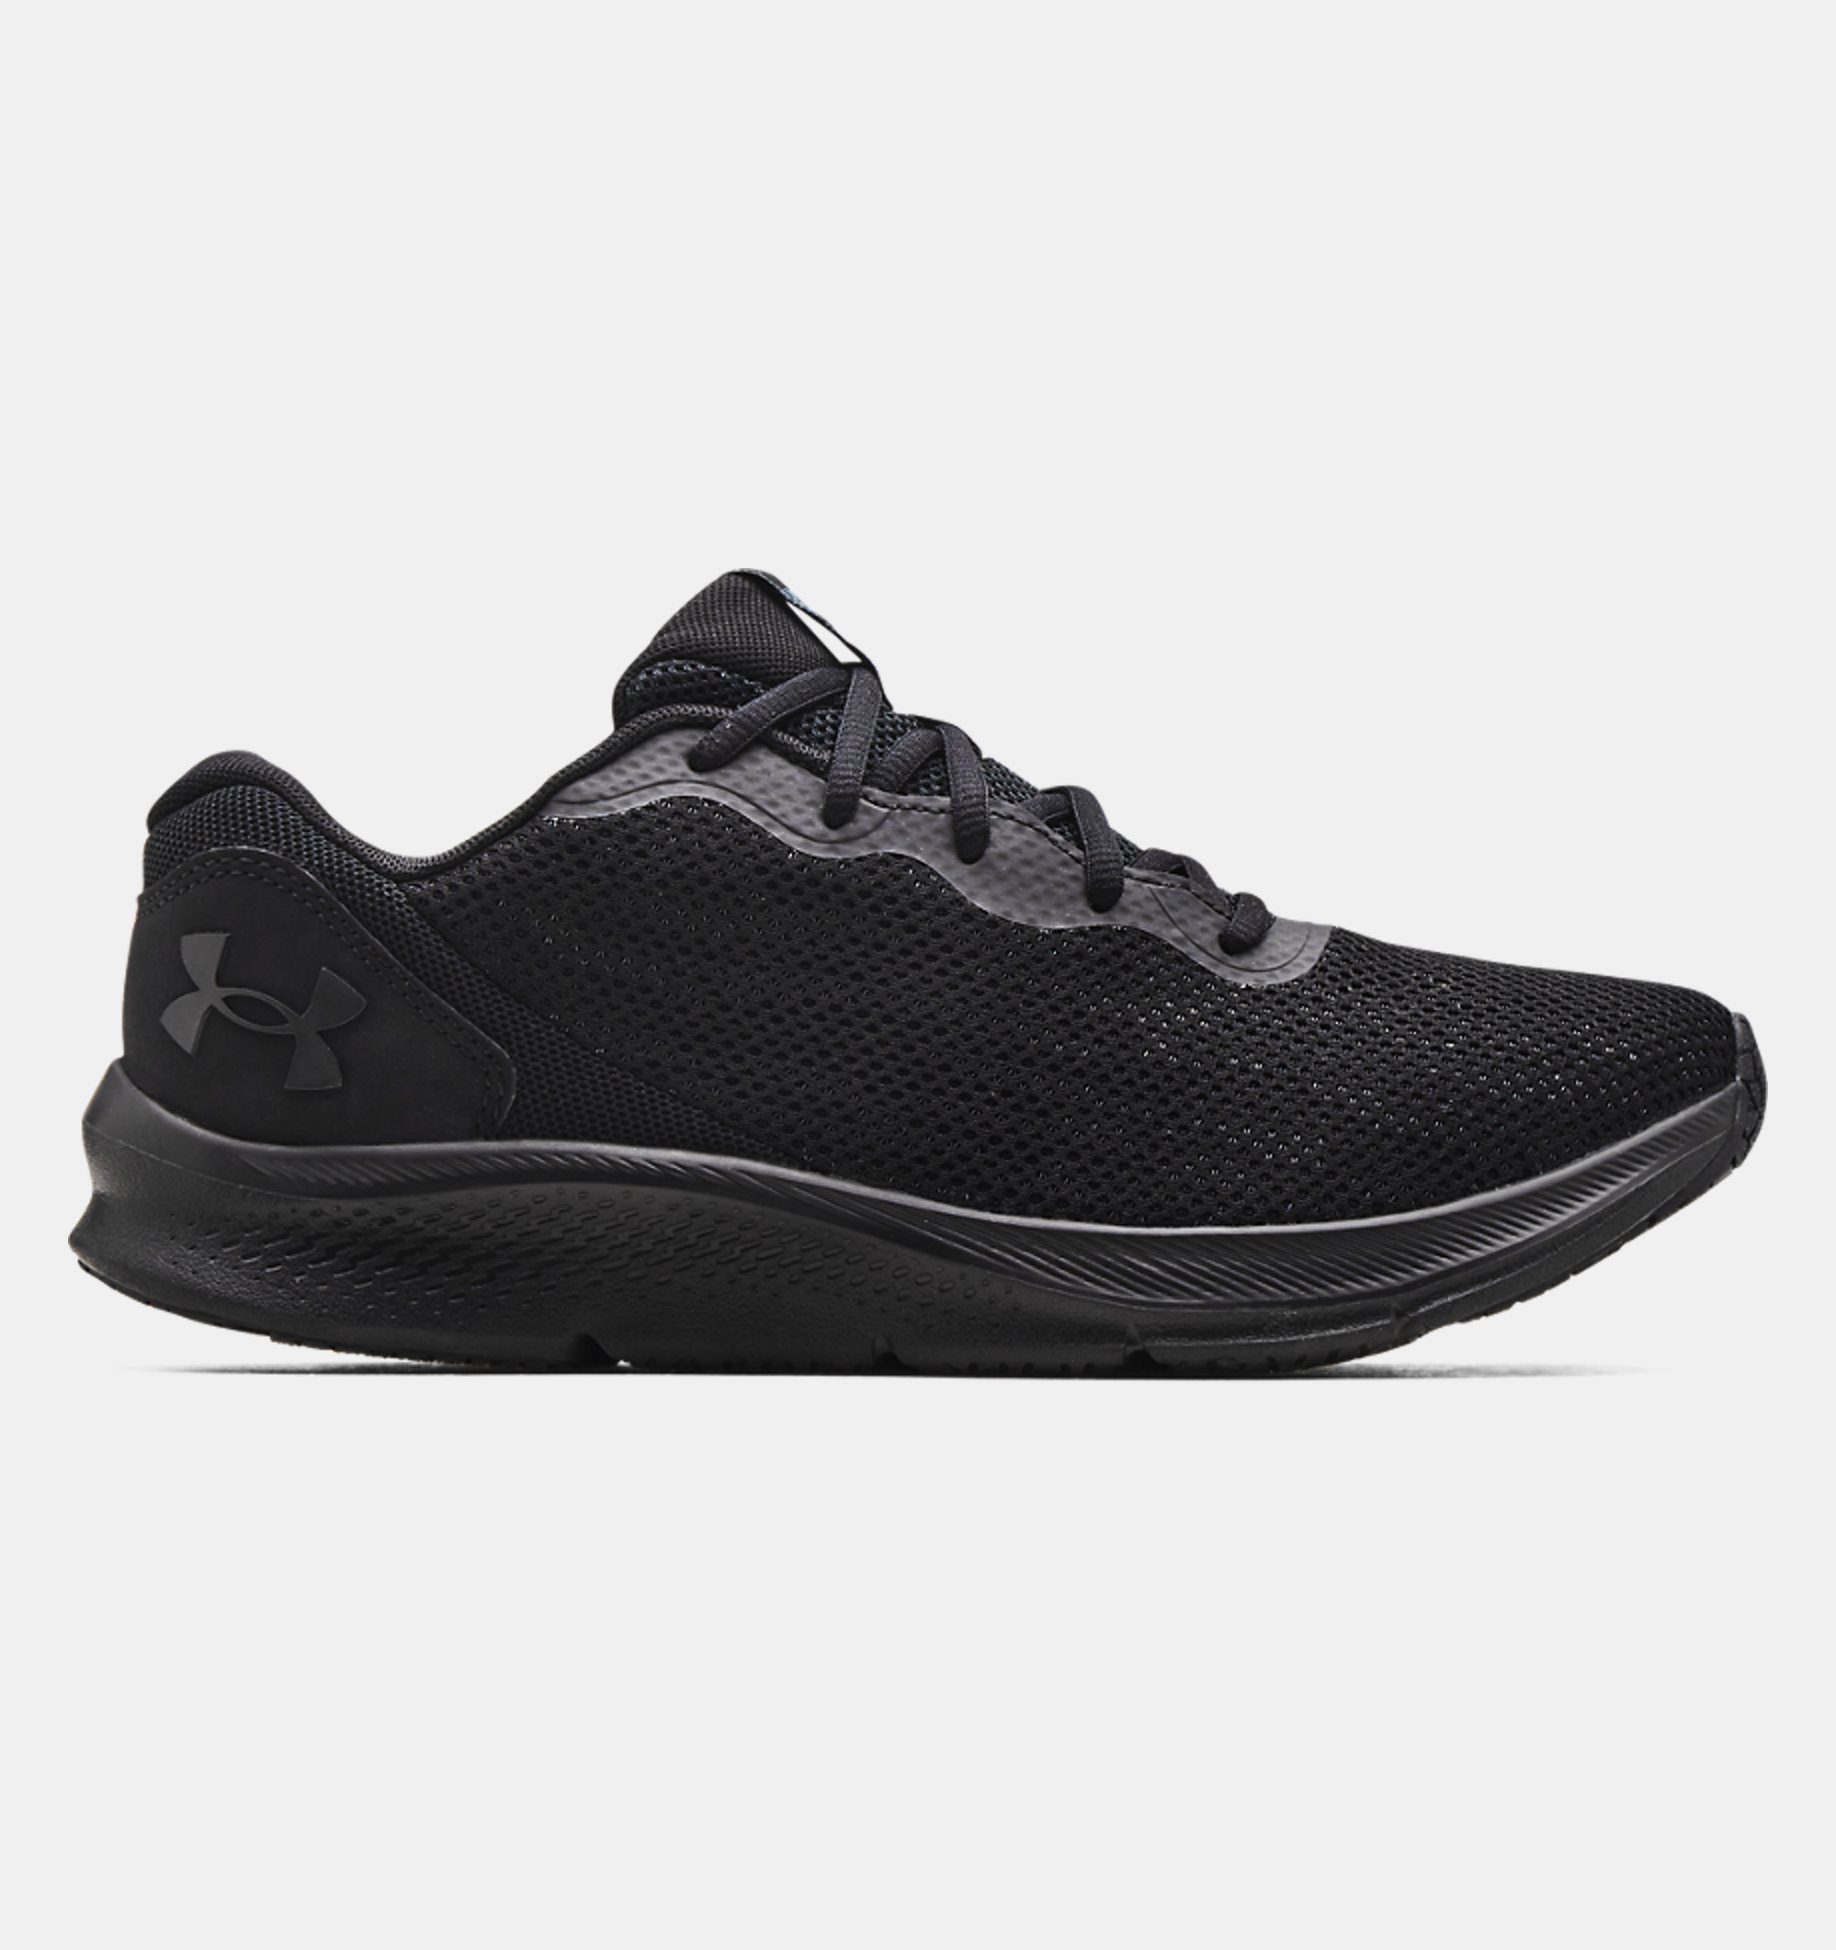 Underarmour Mens UA Shadow Running Shoes